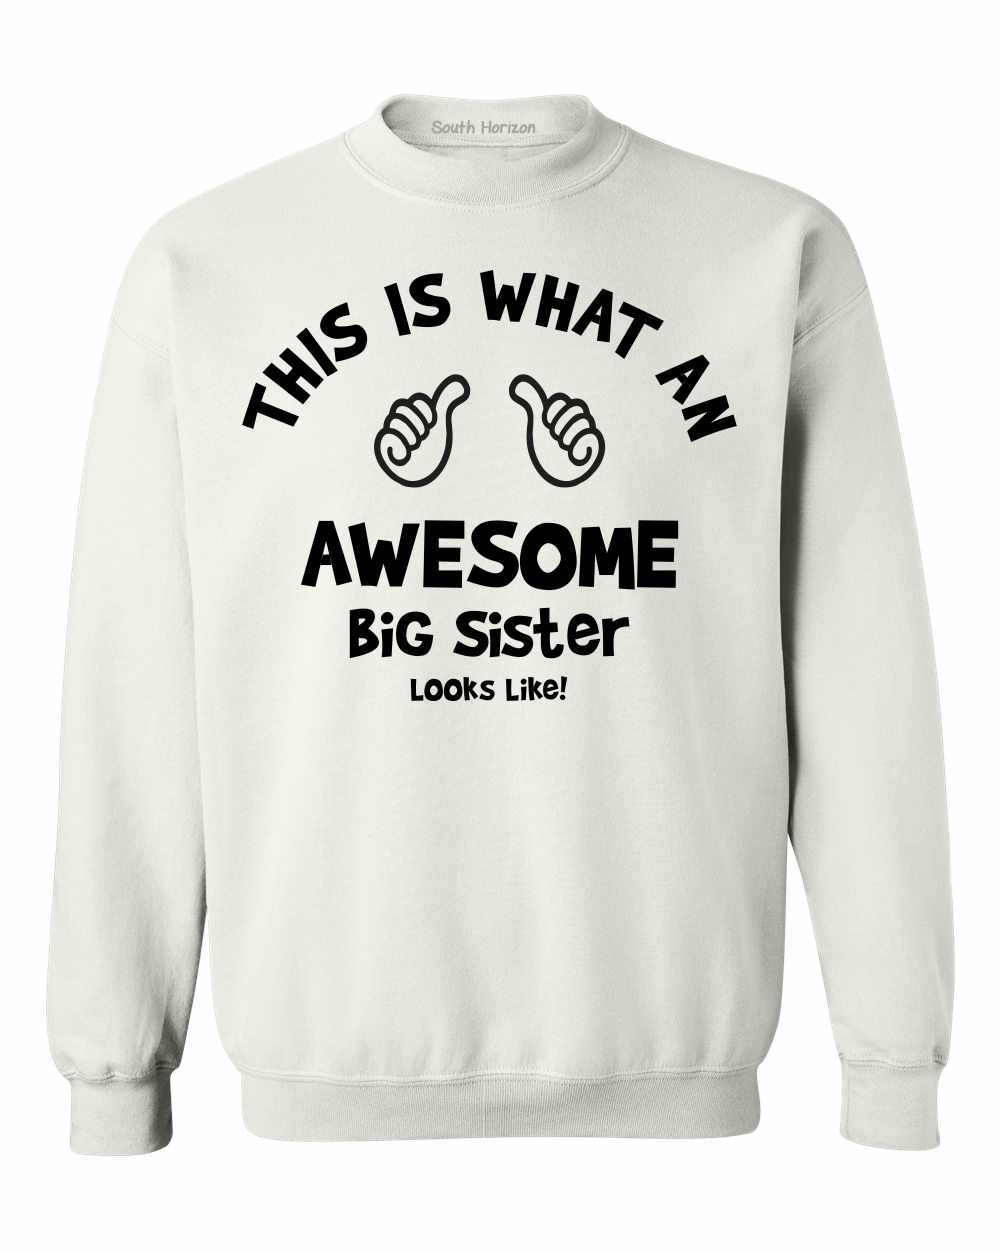 This is What an AWESOME BIG SISTER Looks Like Sweat Shirt (#969-11)